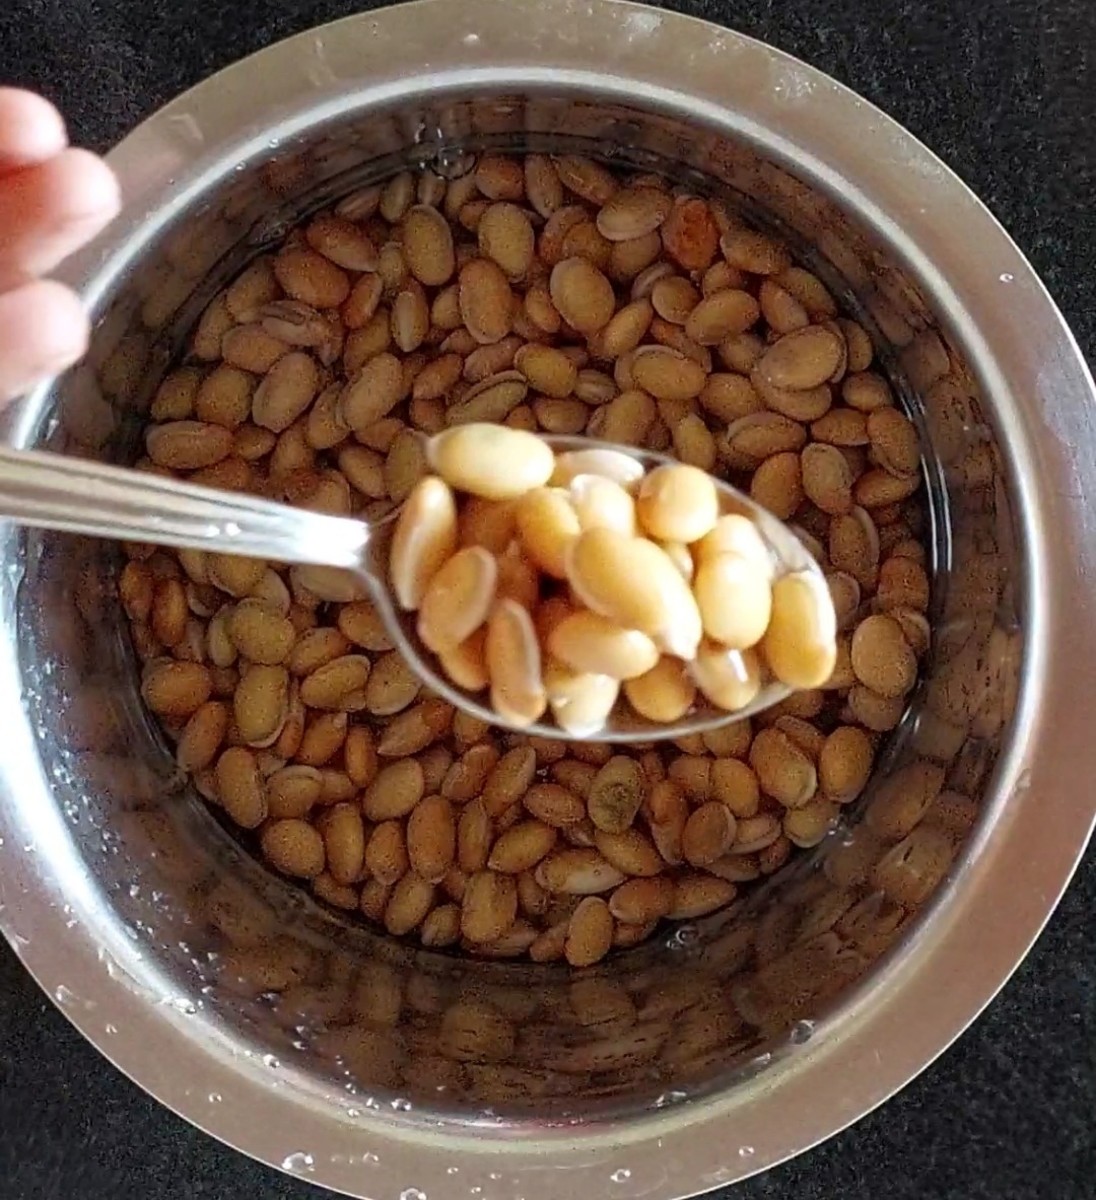 Soak 1 cup of hyacinth bean overnight (skip this step if using fresh or frozen beans).